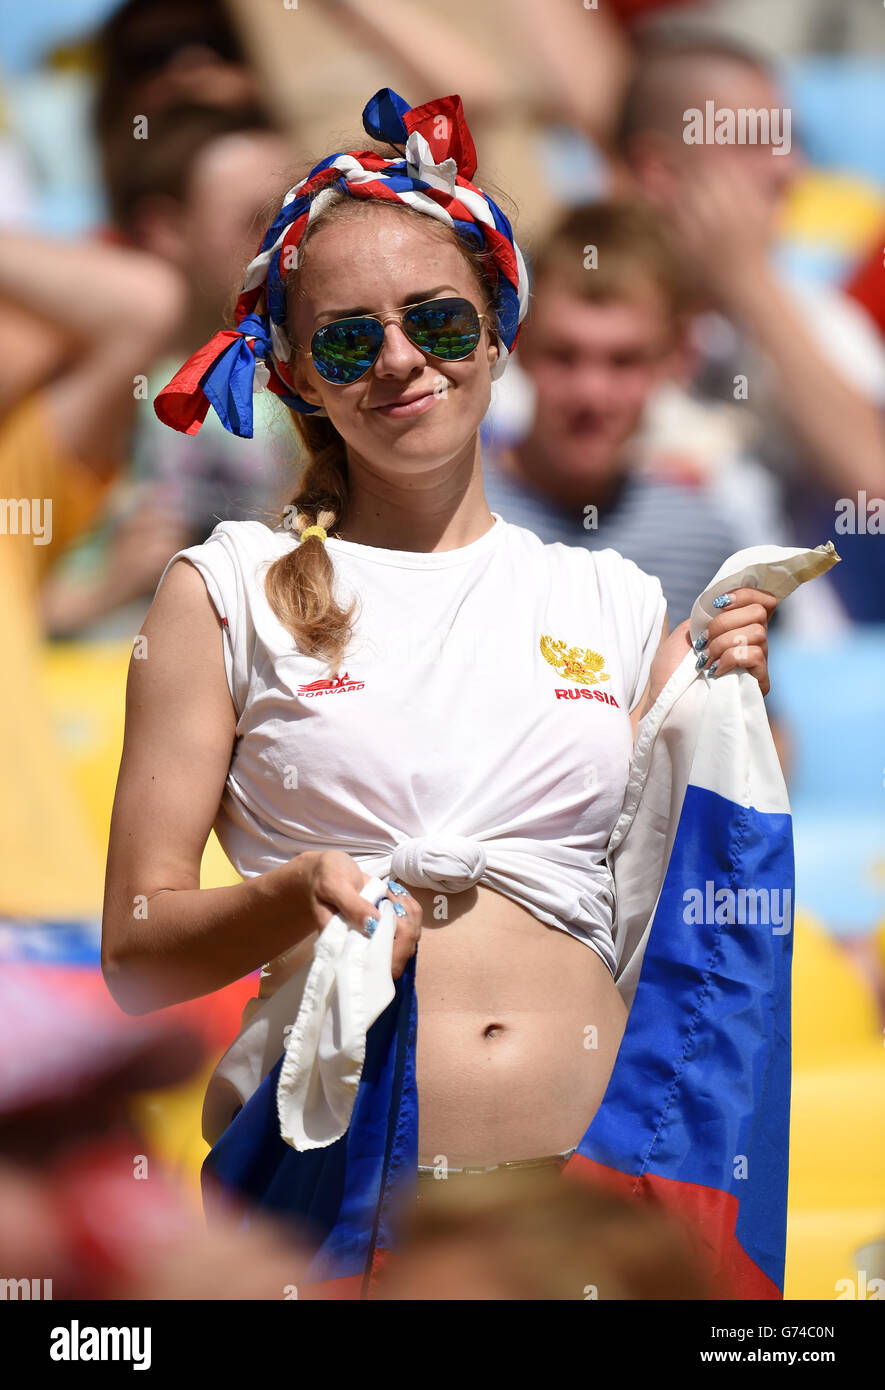 Soccer - FIFA World Cup 2014 - Group H - Belgium v Russia - Maracana. A Russia fan shows support for her team in the stands Stock Photo